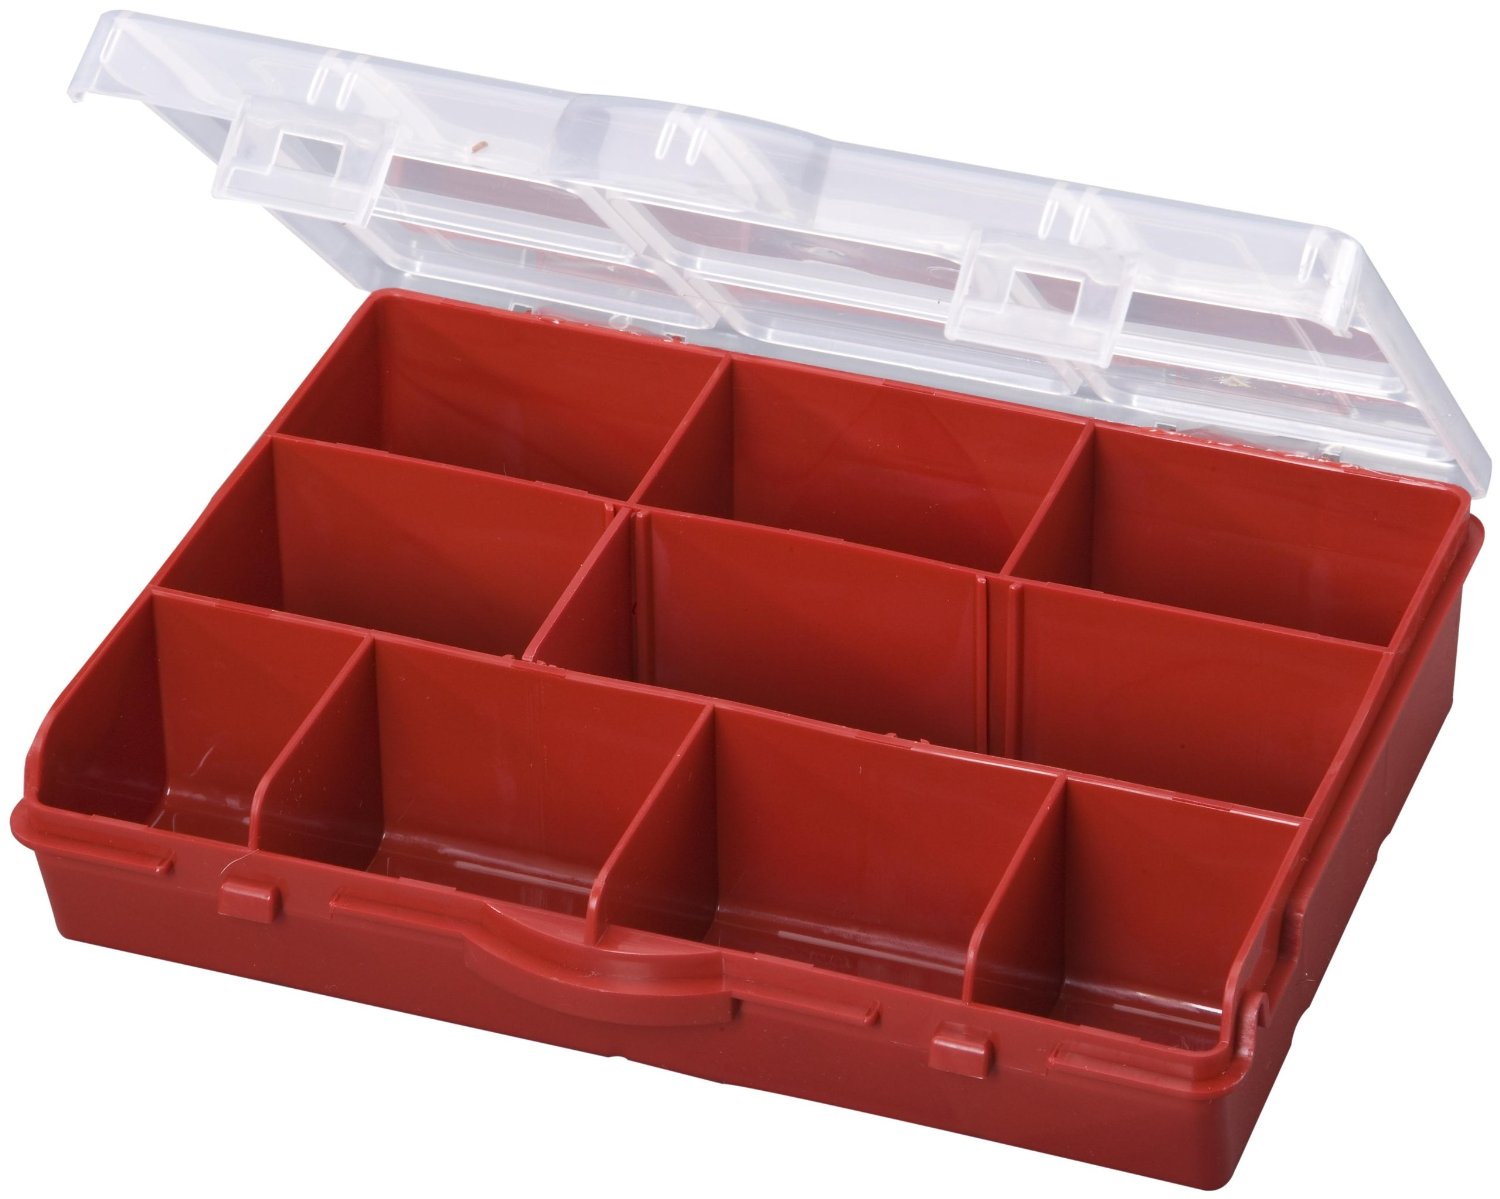 storage container with compartments